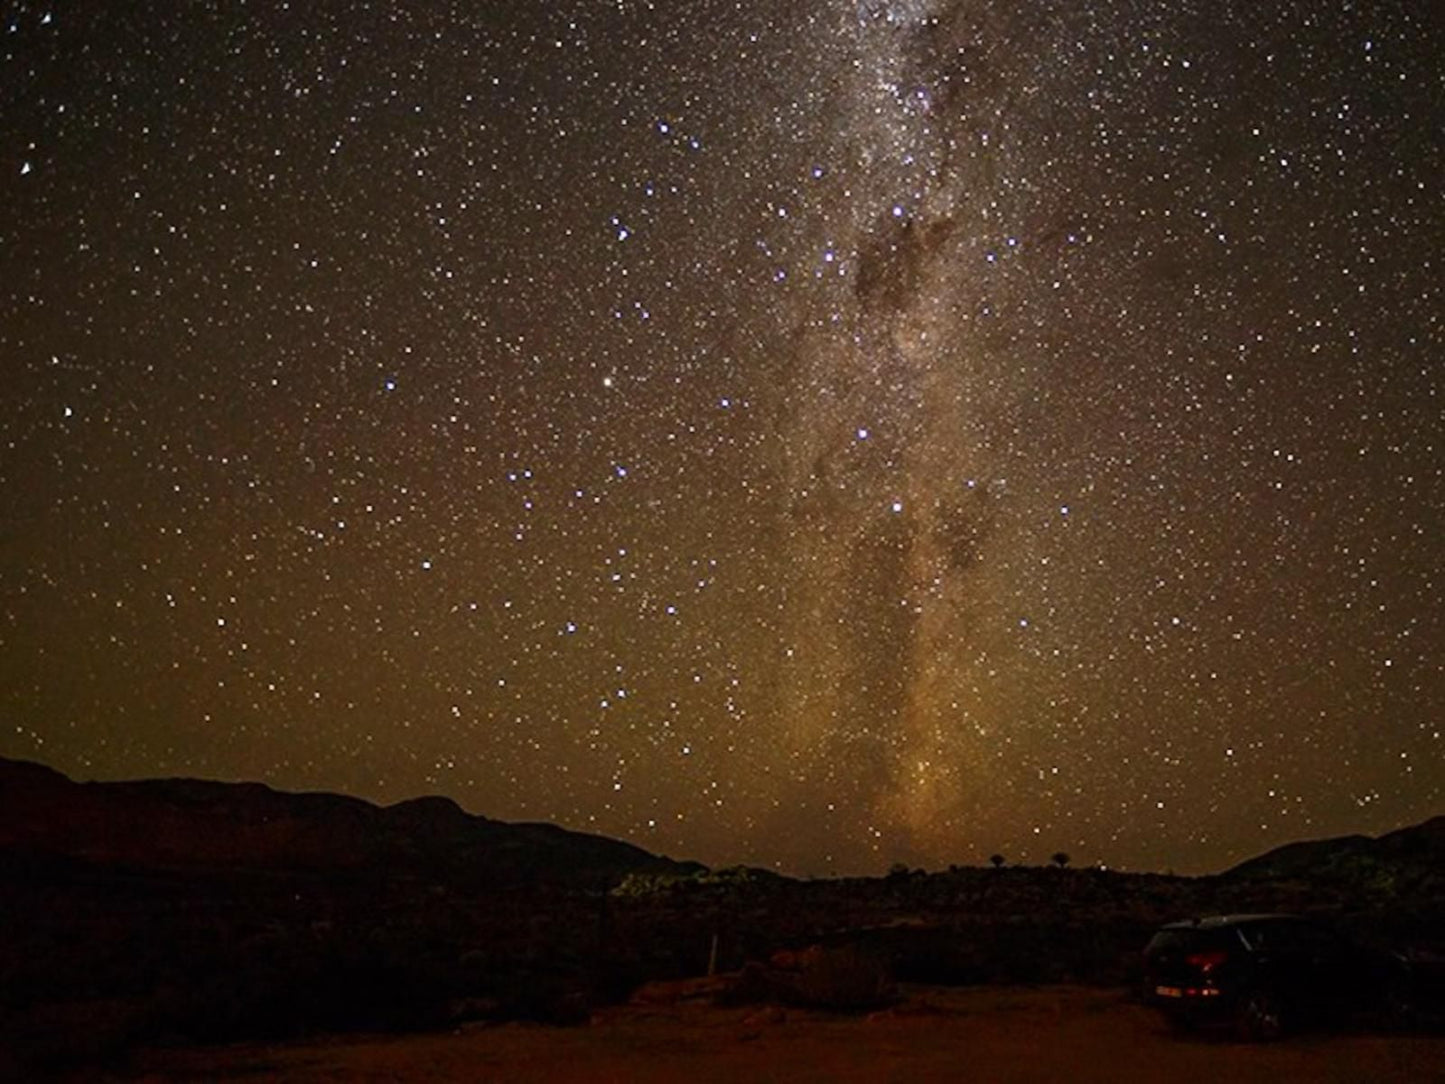 Sperrgebiet Lodge Springbok Northern Cape South Africa Astronomy, Nature, Night Sky, Car, Vehicle